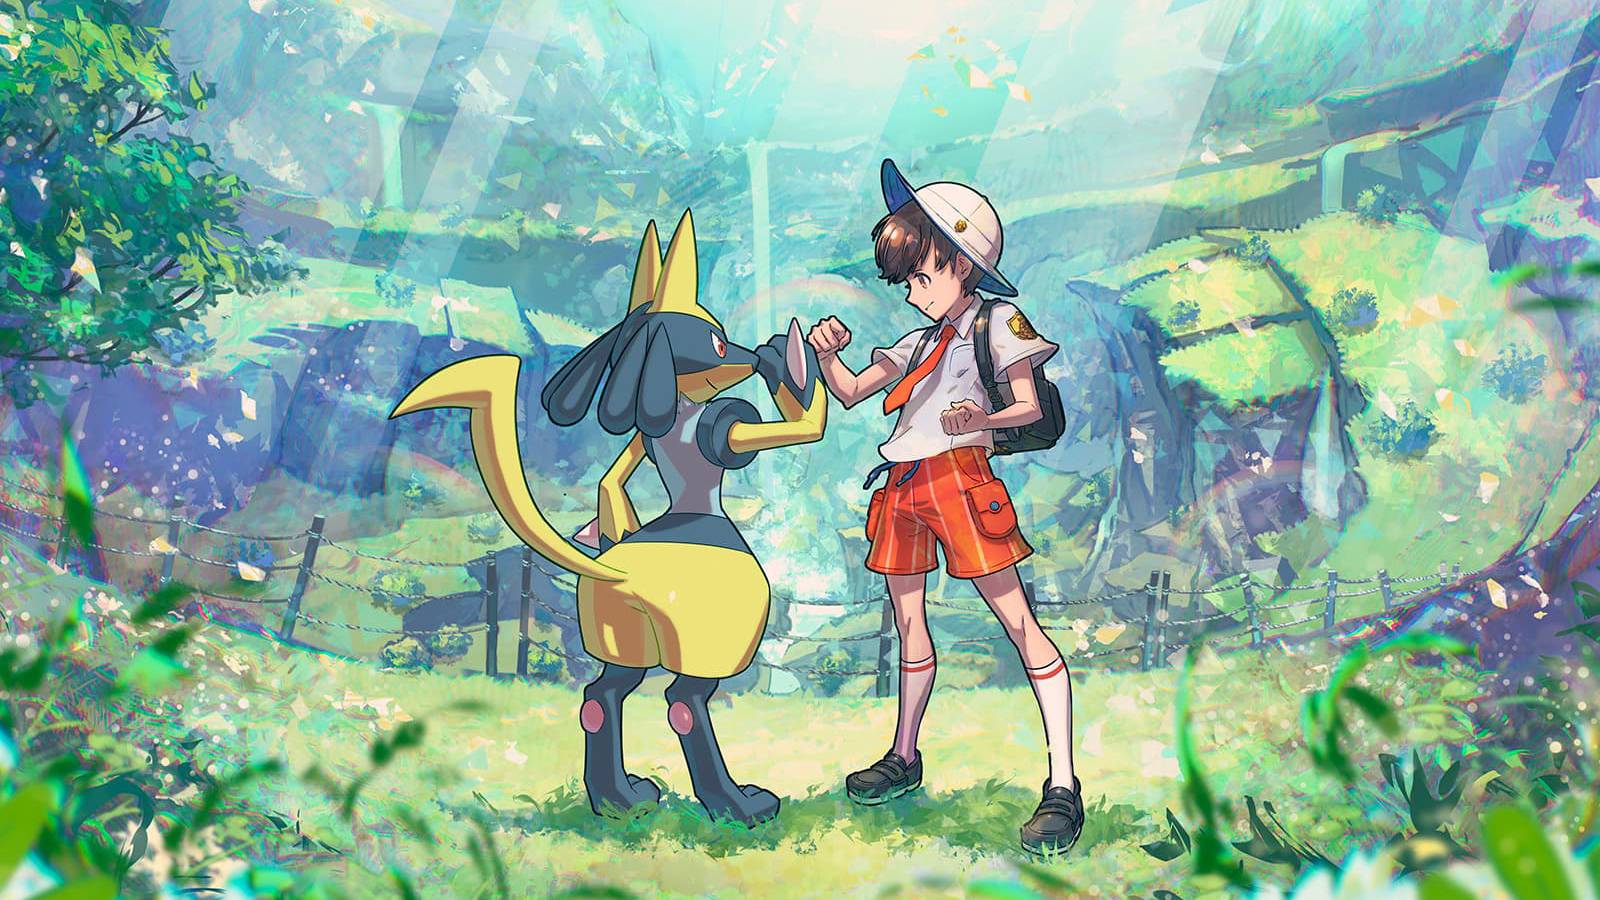 A Pokemon trainer stands next to a Shiny Lucario